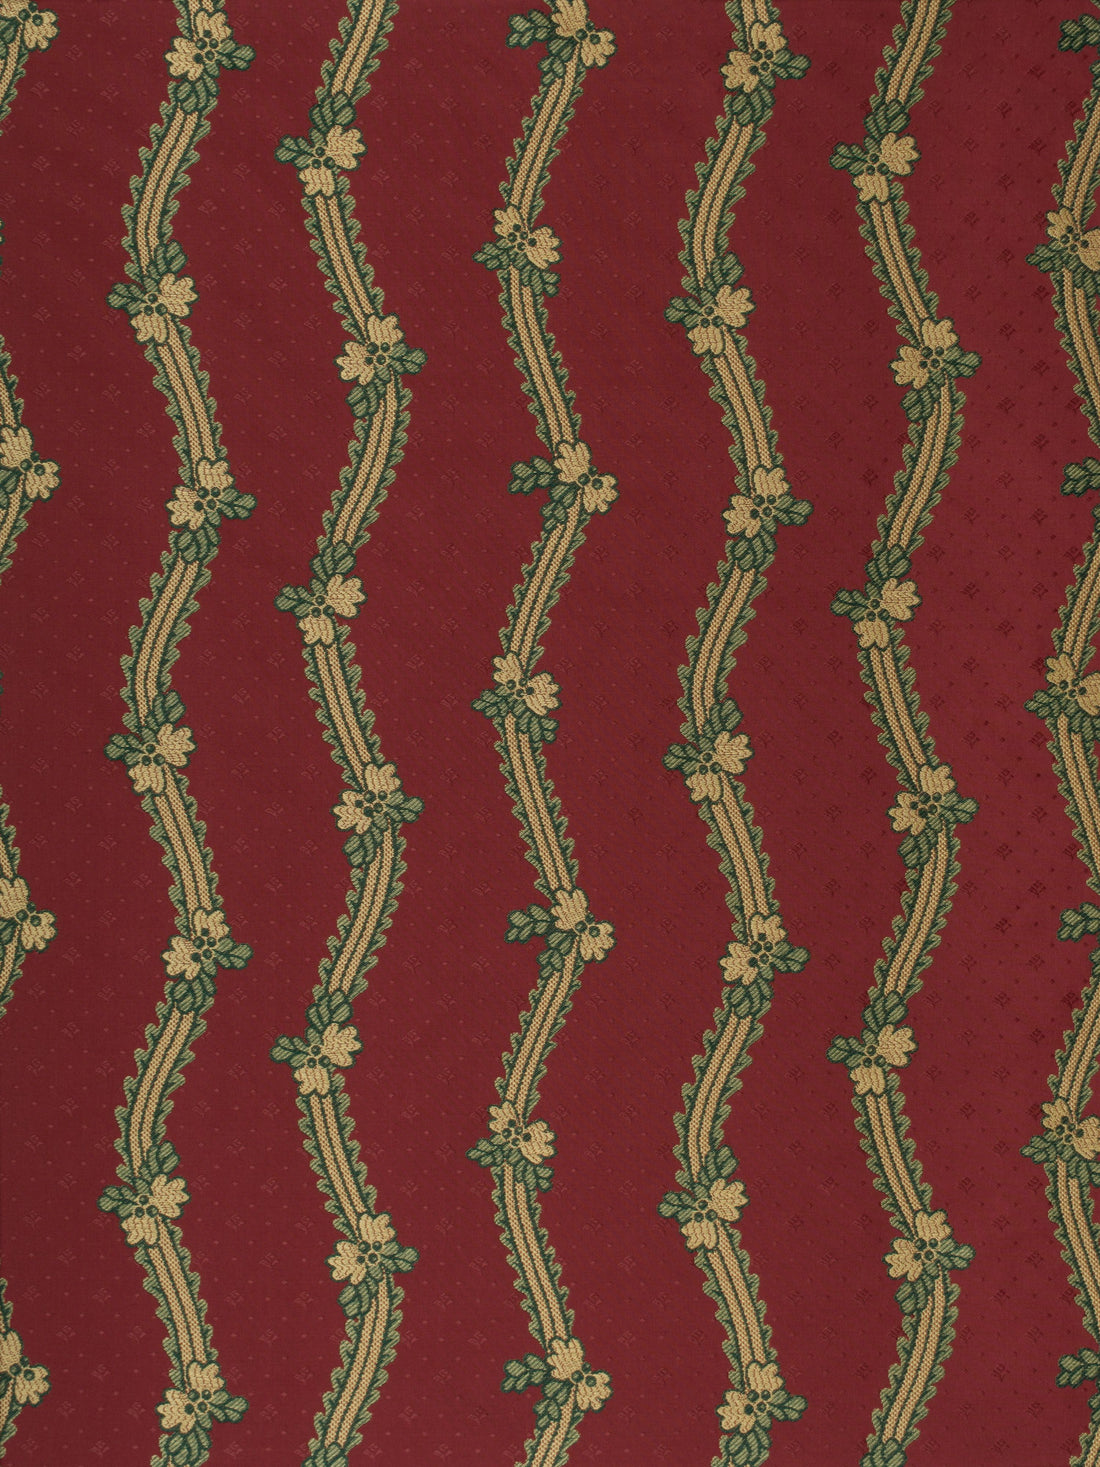 Striped Tiepolo fabric in red color - pattern number M0 00051398 - by Scalamandre in the Old World Weavers collection